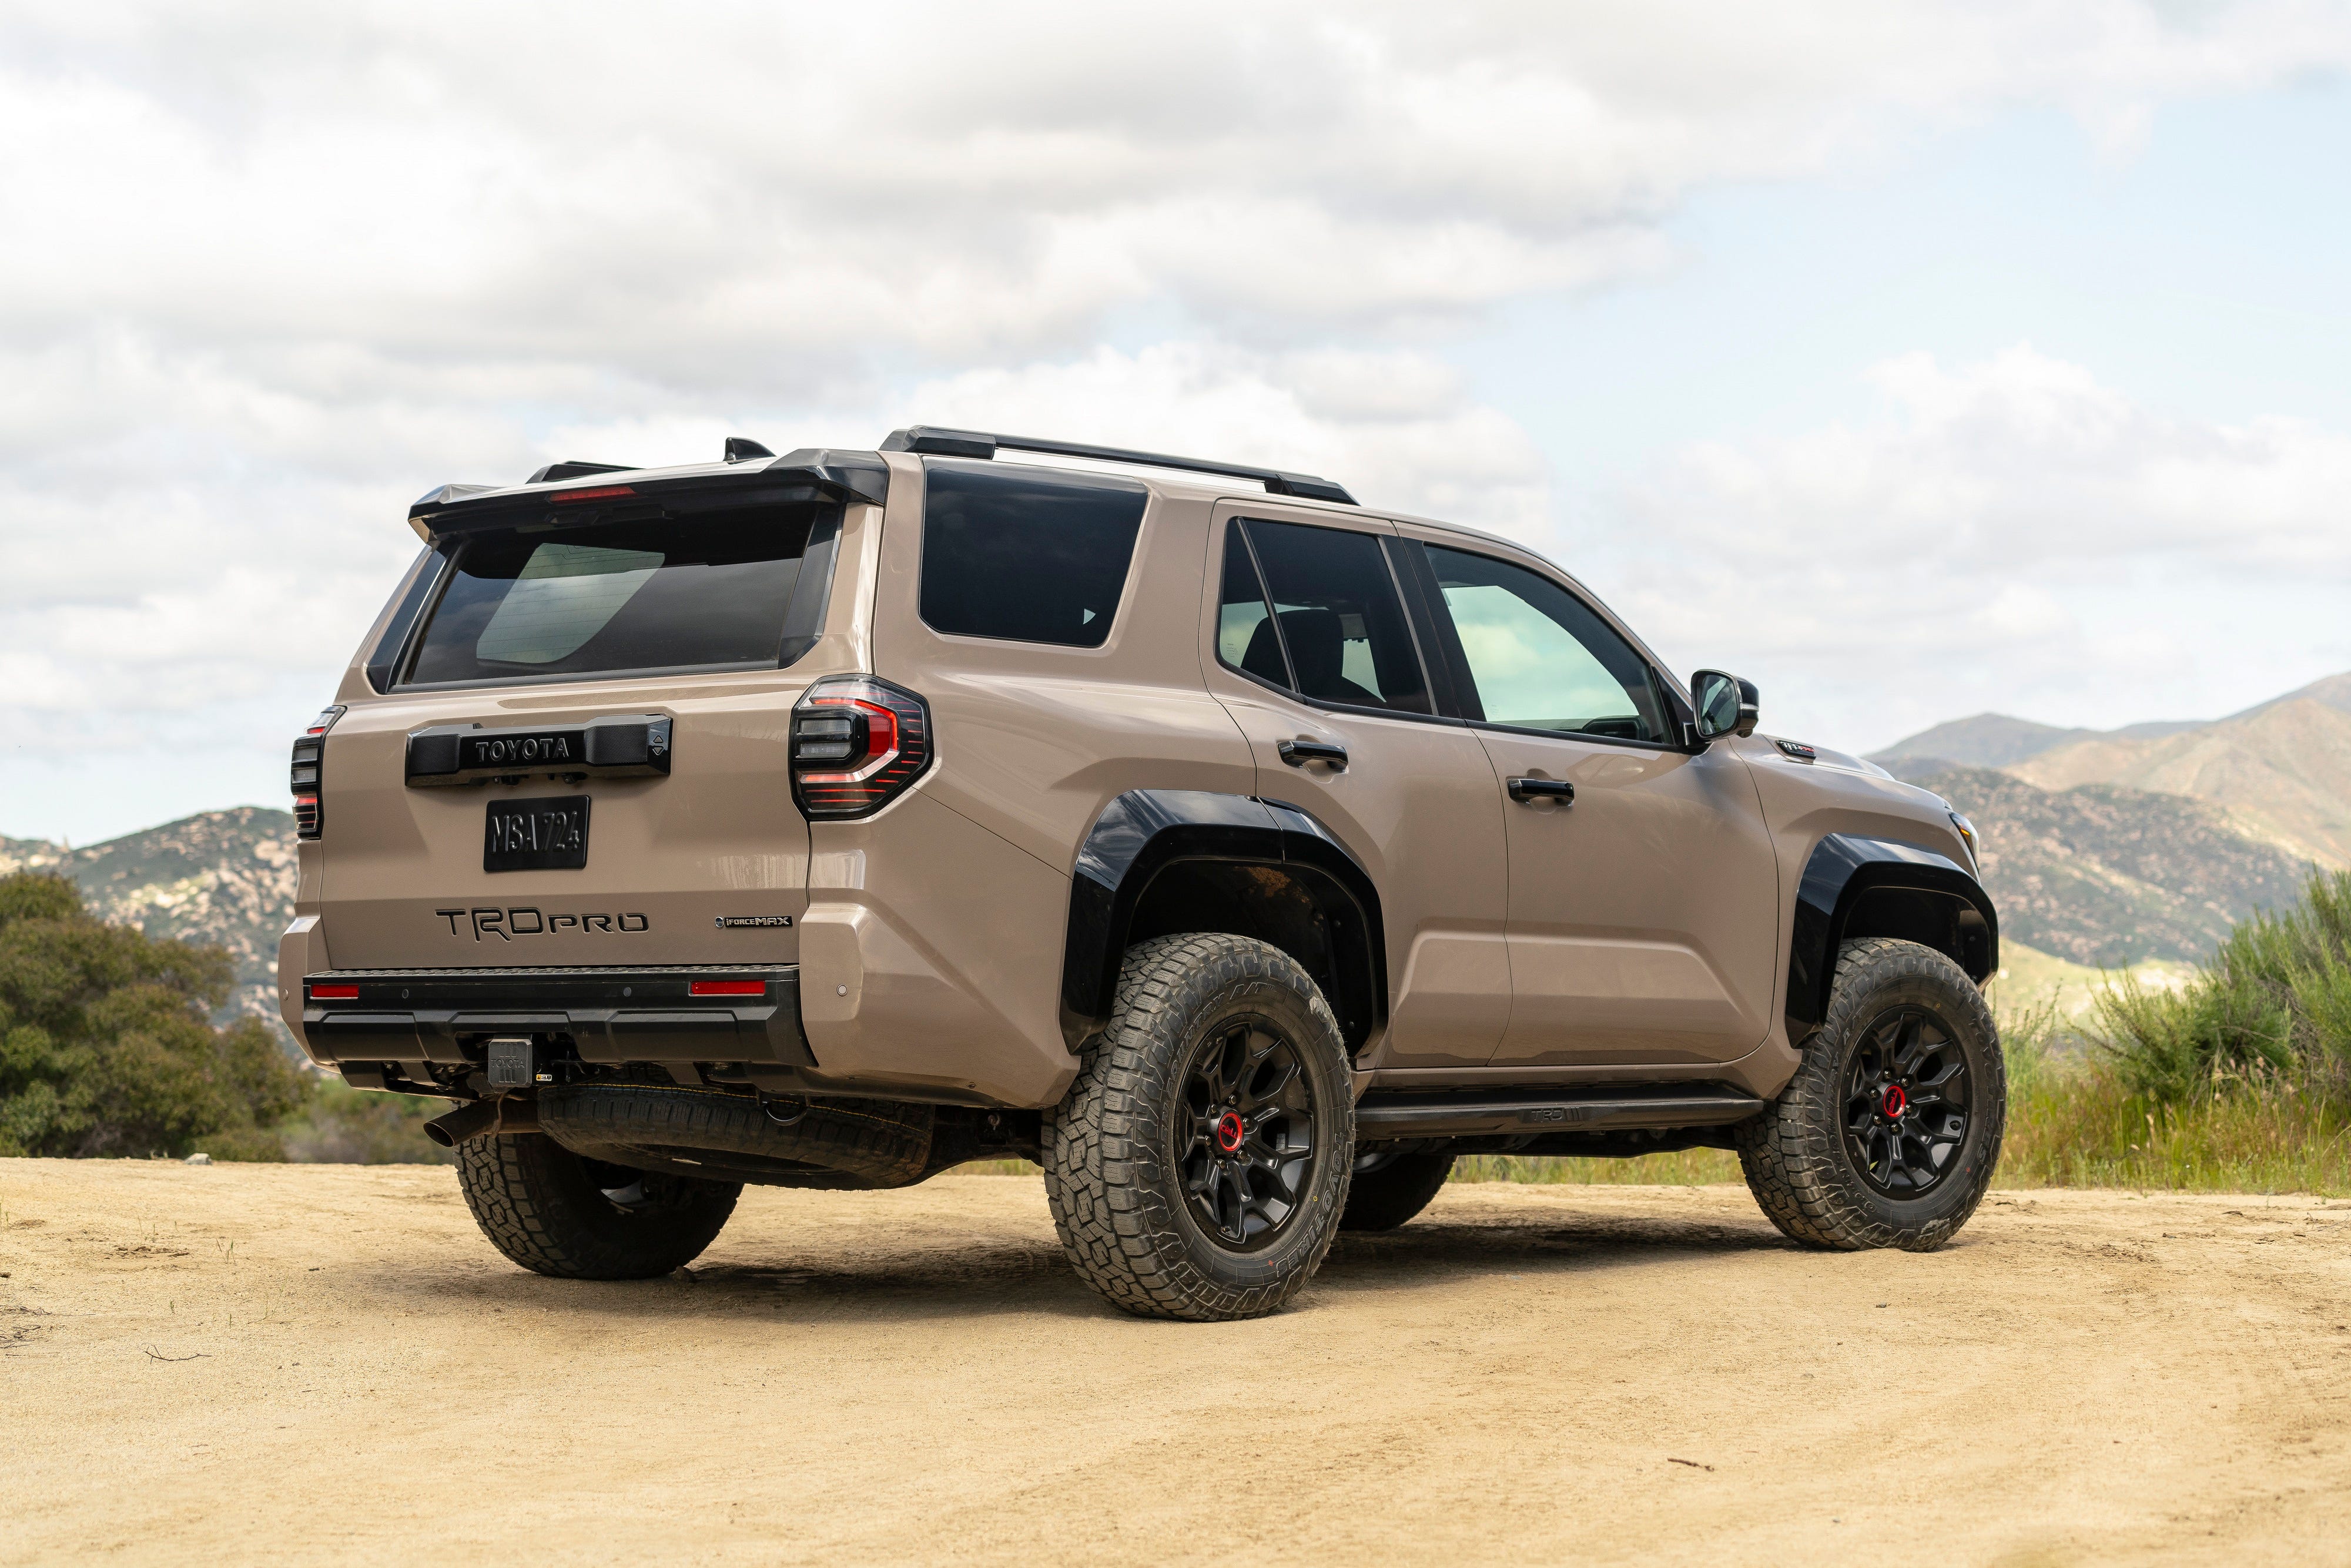 <p>Several variants of the 4Runner come equipped with the i-FORCE MAX hybrid powertrain, pairing a turbocharged 2.4-liter engine with a 48-horsepower electric motor. The 326 hp hybrid option is available on five of the nine new 4Runner variants.</p>